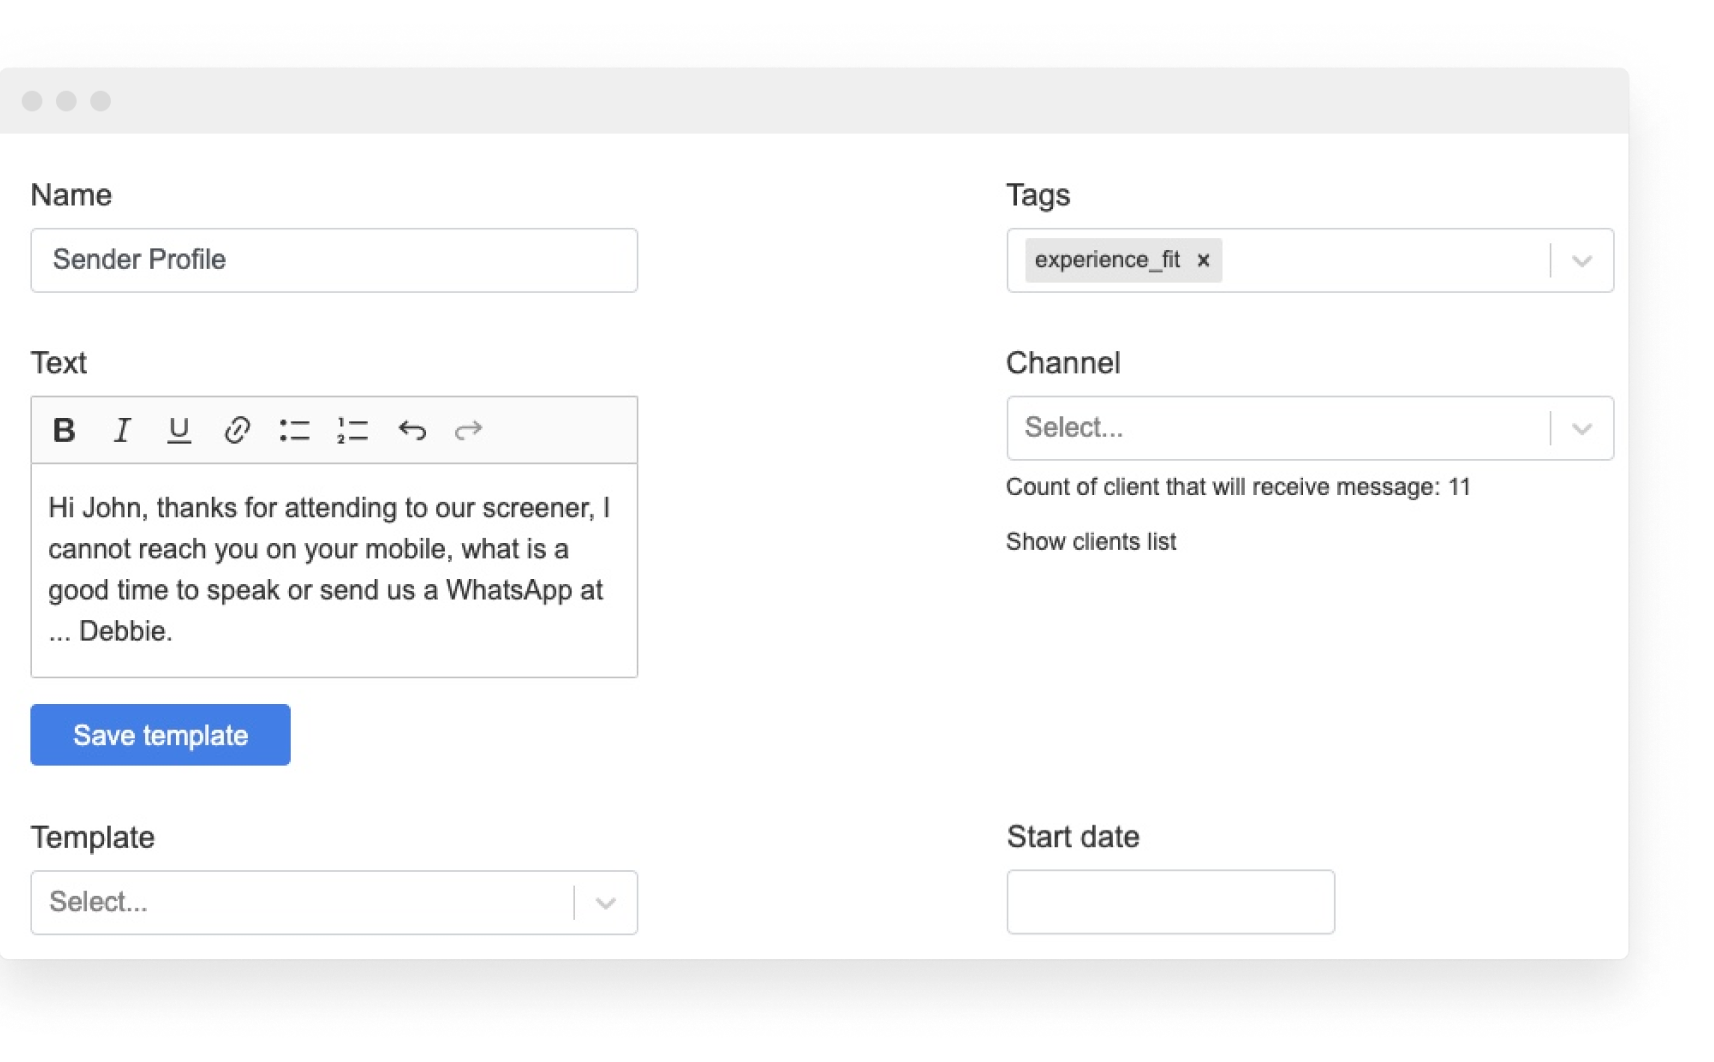 Improve team productivity with a shared chat inbox and centralize all your messaging channels